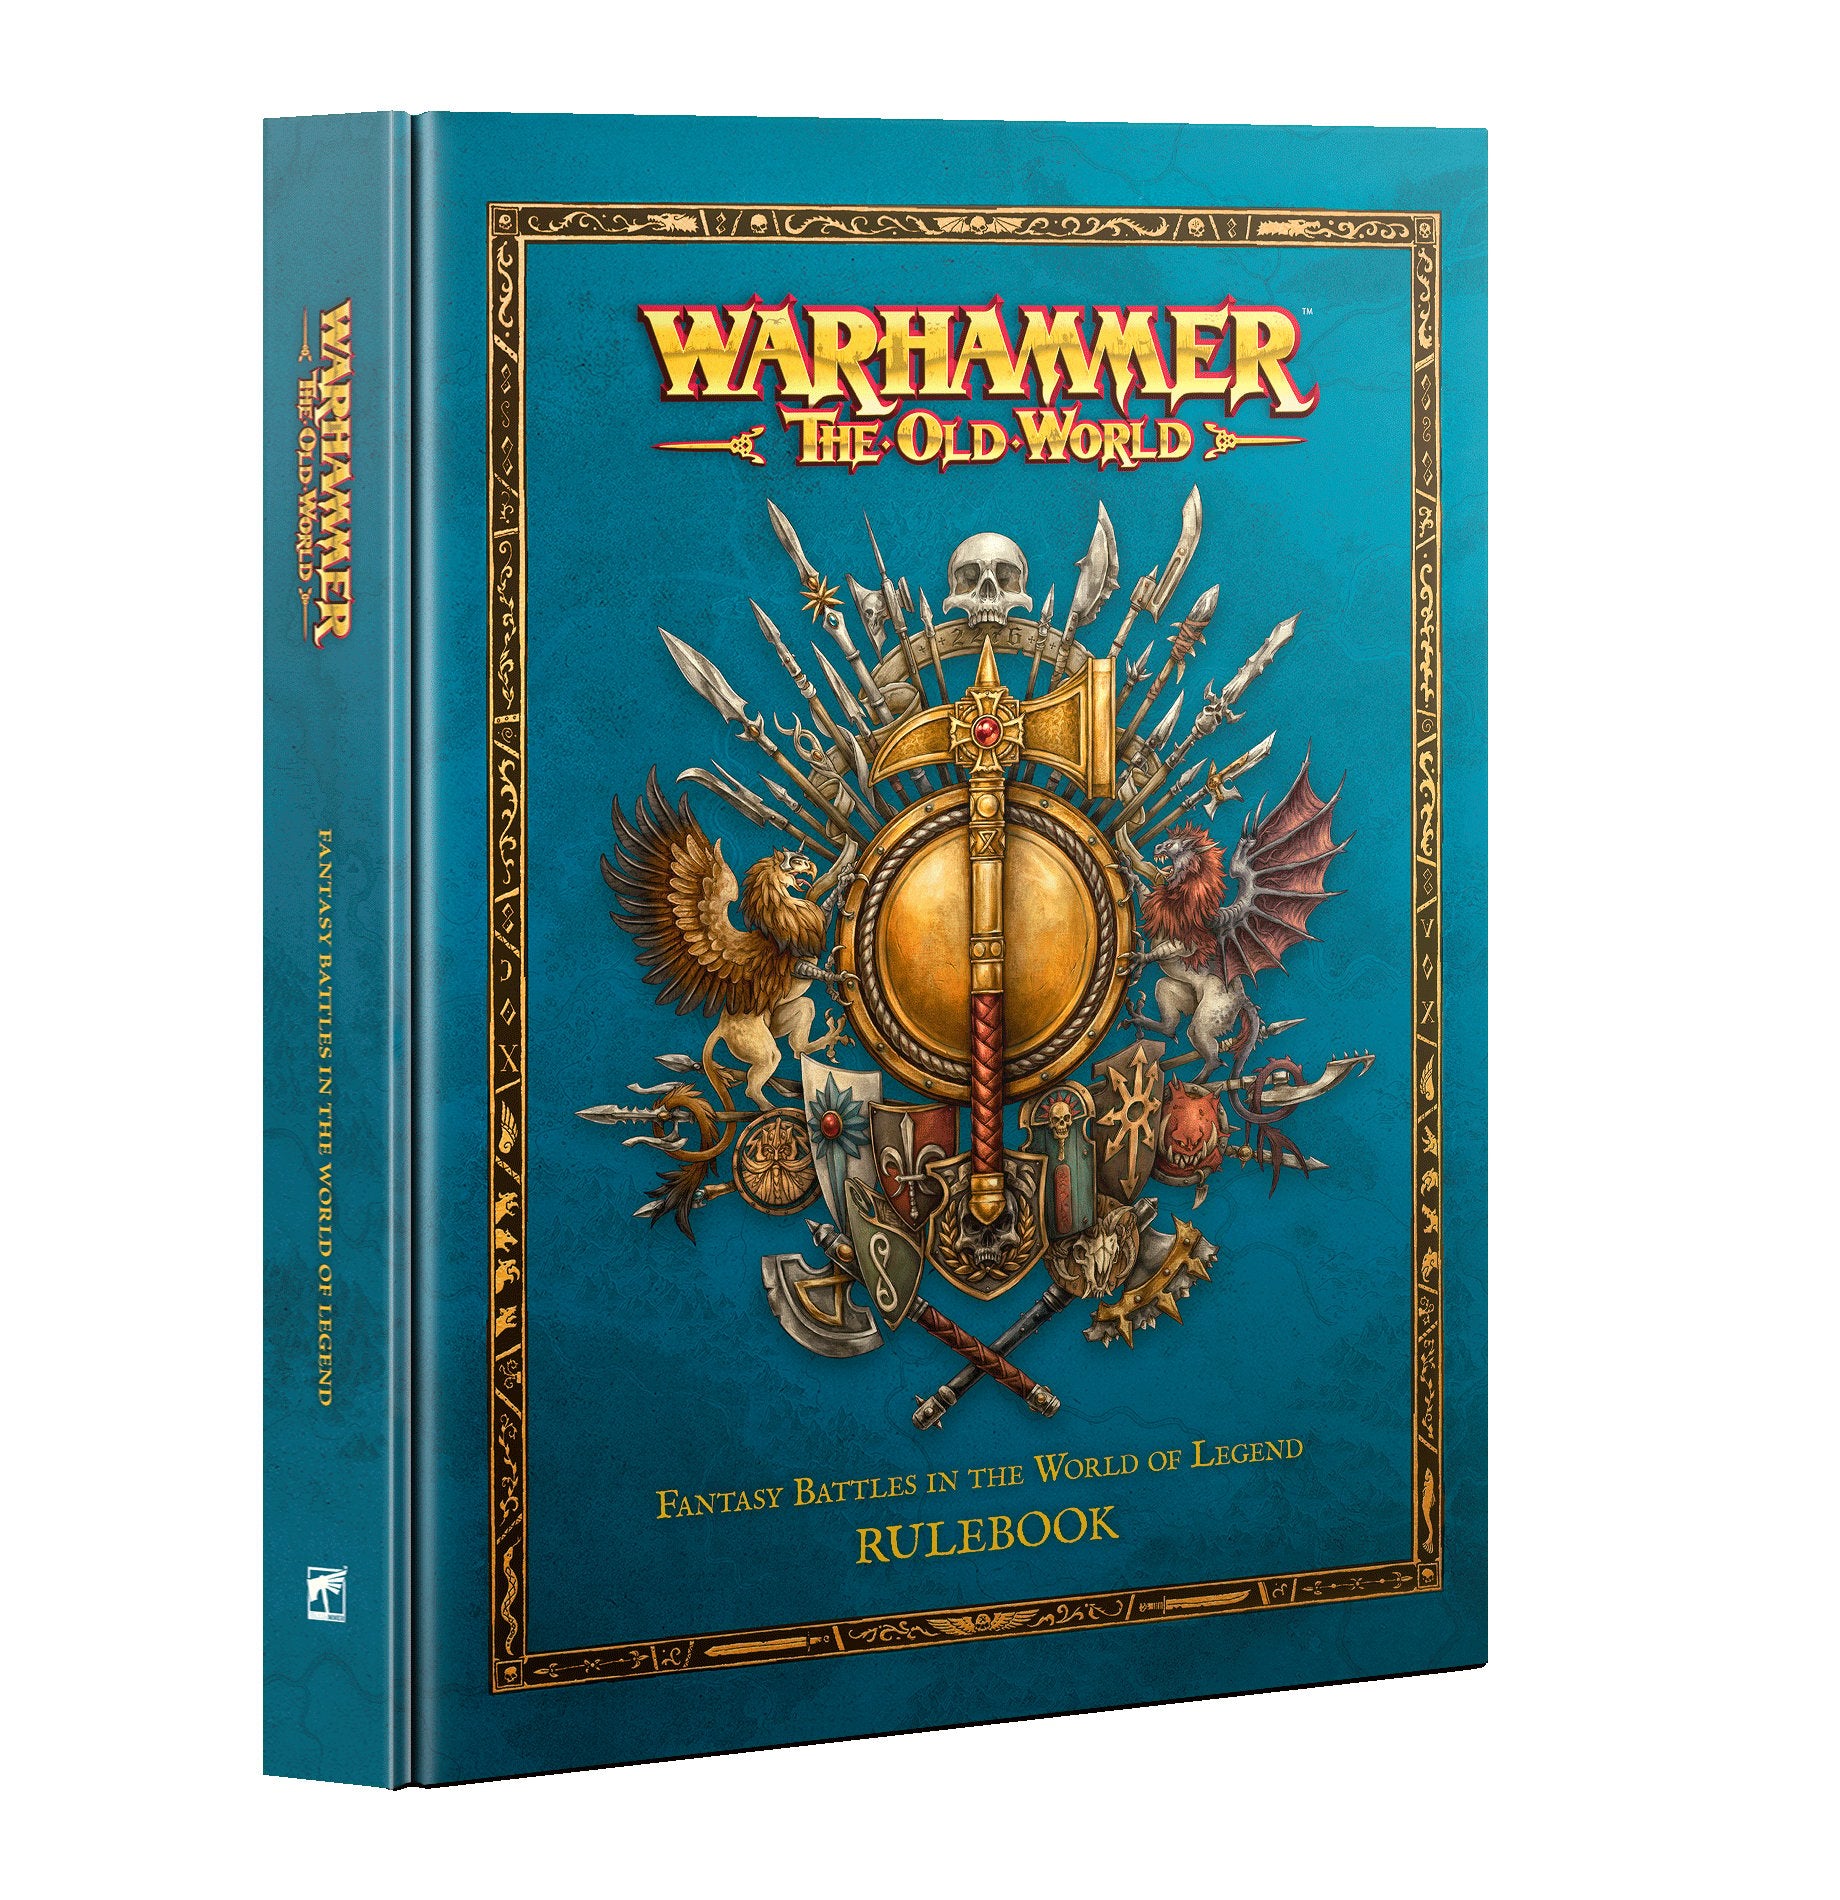 Warhammer: The Old World Rulebook - Release Date 20/1/24 - Loaded Dice Barry Vale of Glamorgan CF64 3HD